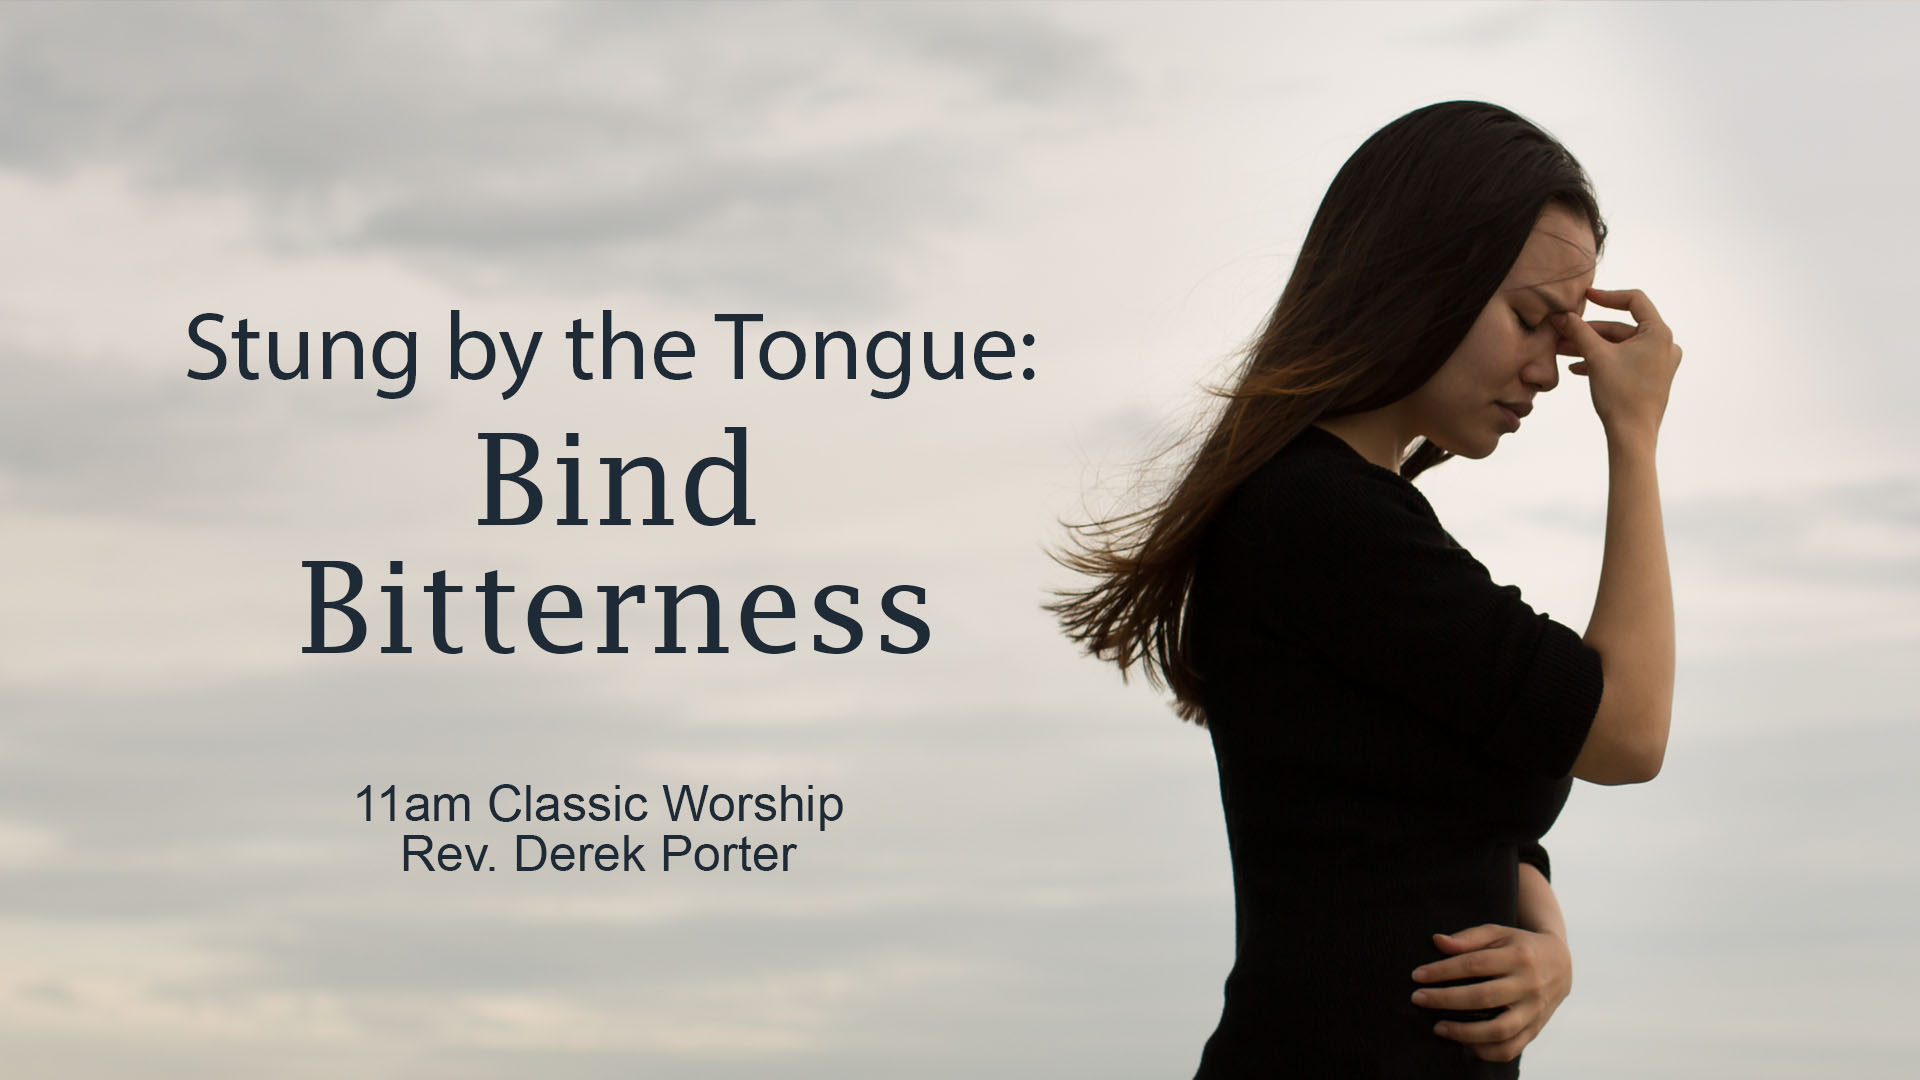 Stung by the Tongue: Bind Bitterness